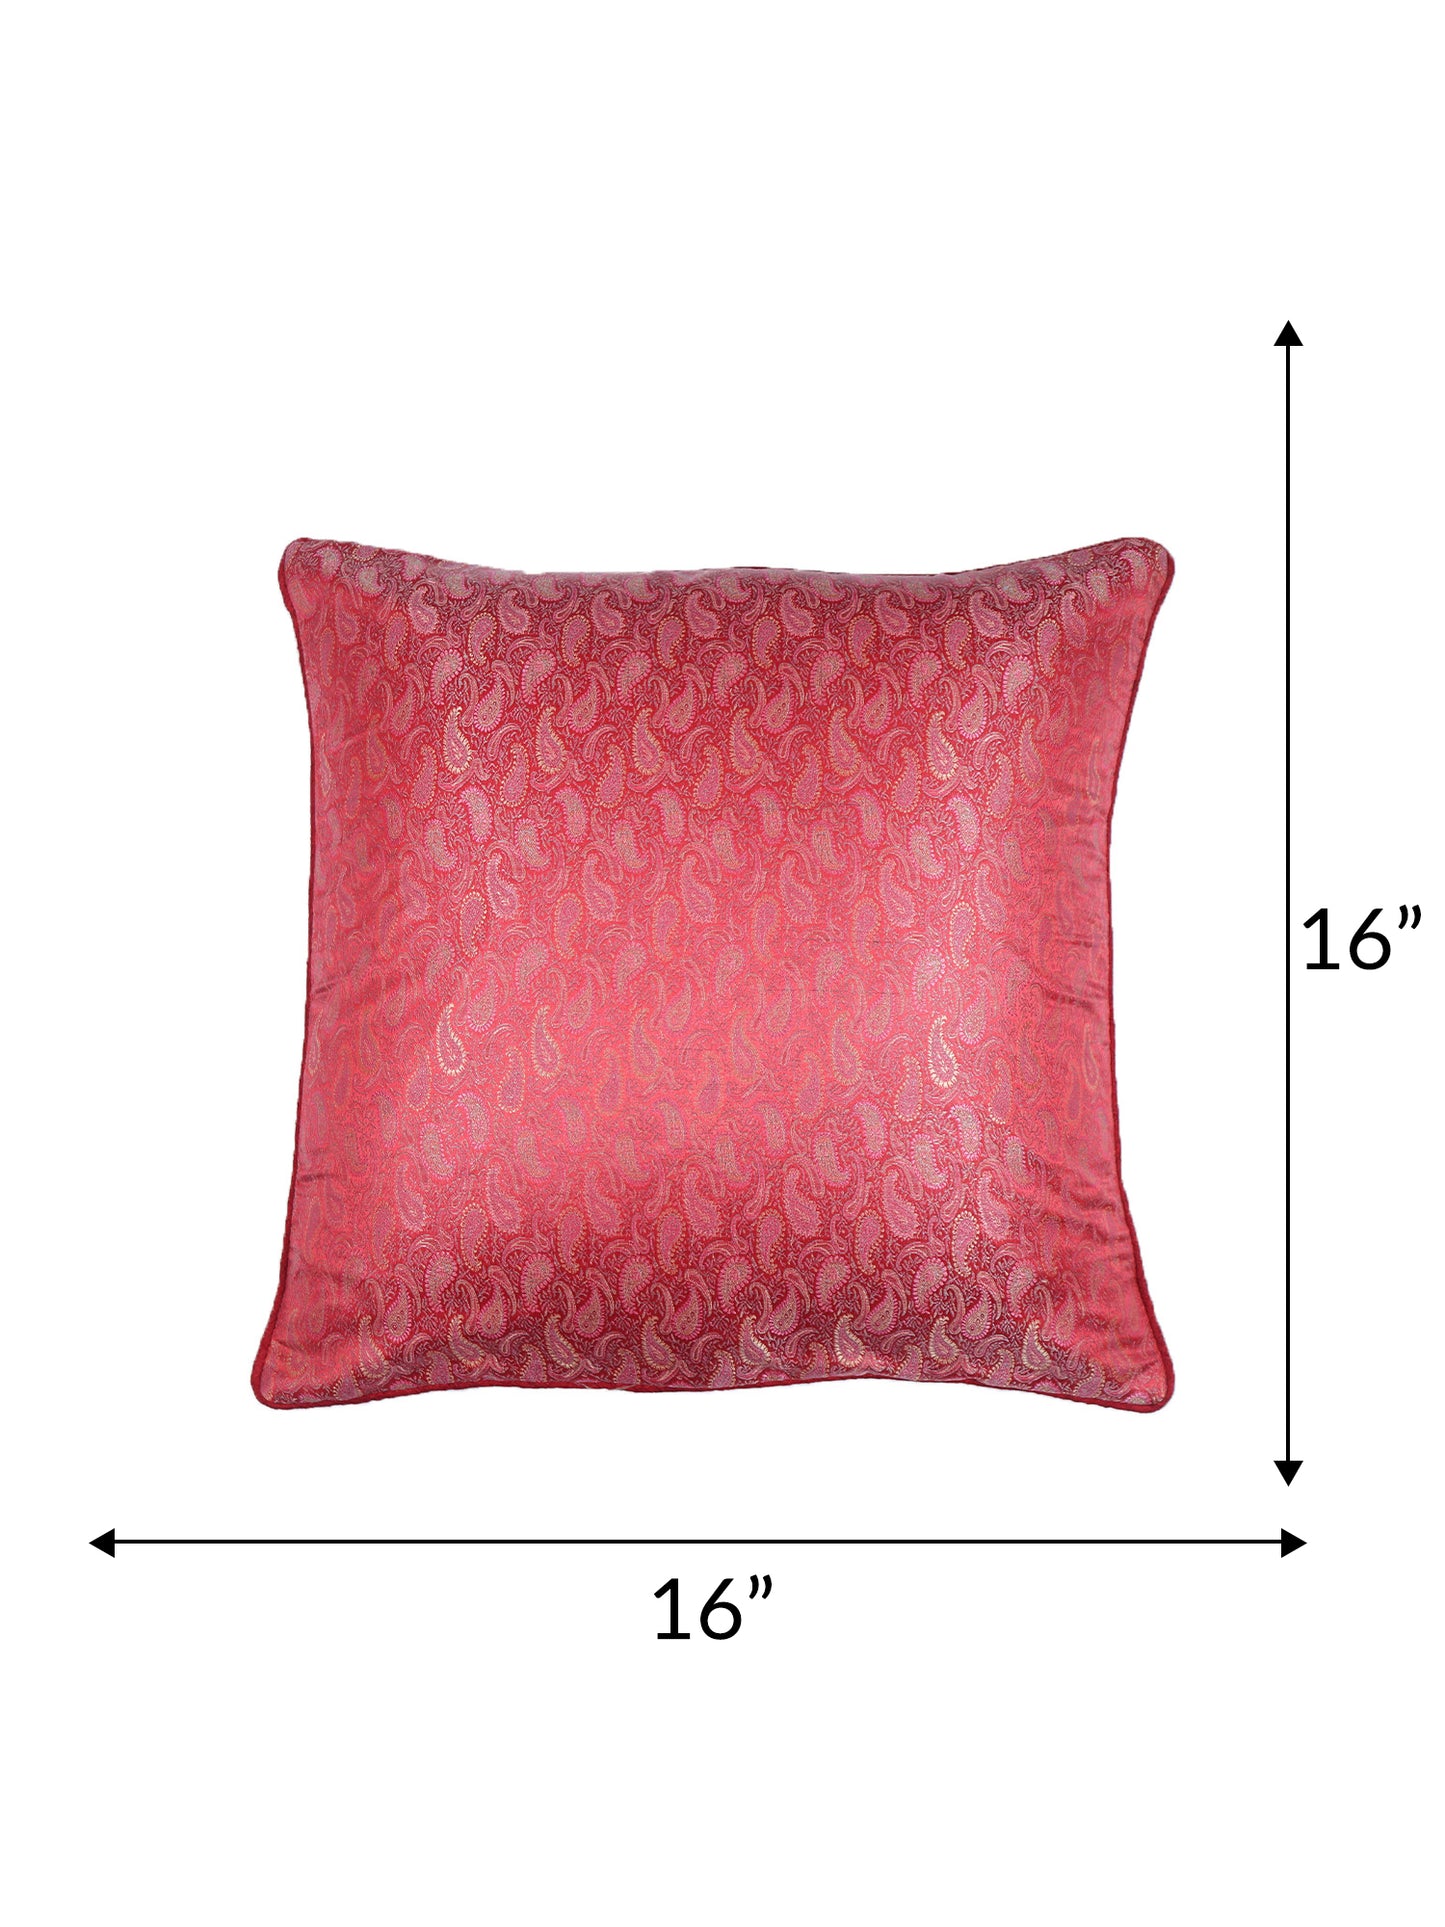 Cushion Cover for Sofa, Bed Varanasi Silk Paisely with Cord Piping | Pink - 16x16in(40x40cm) (Pack of 1)